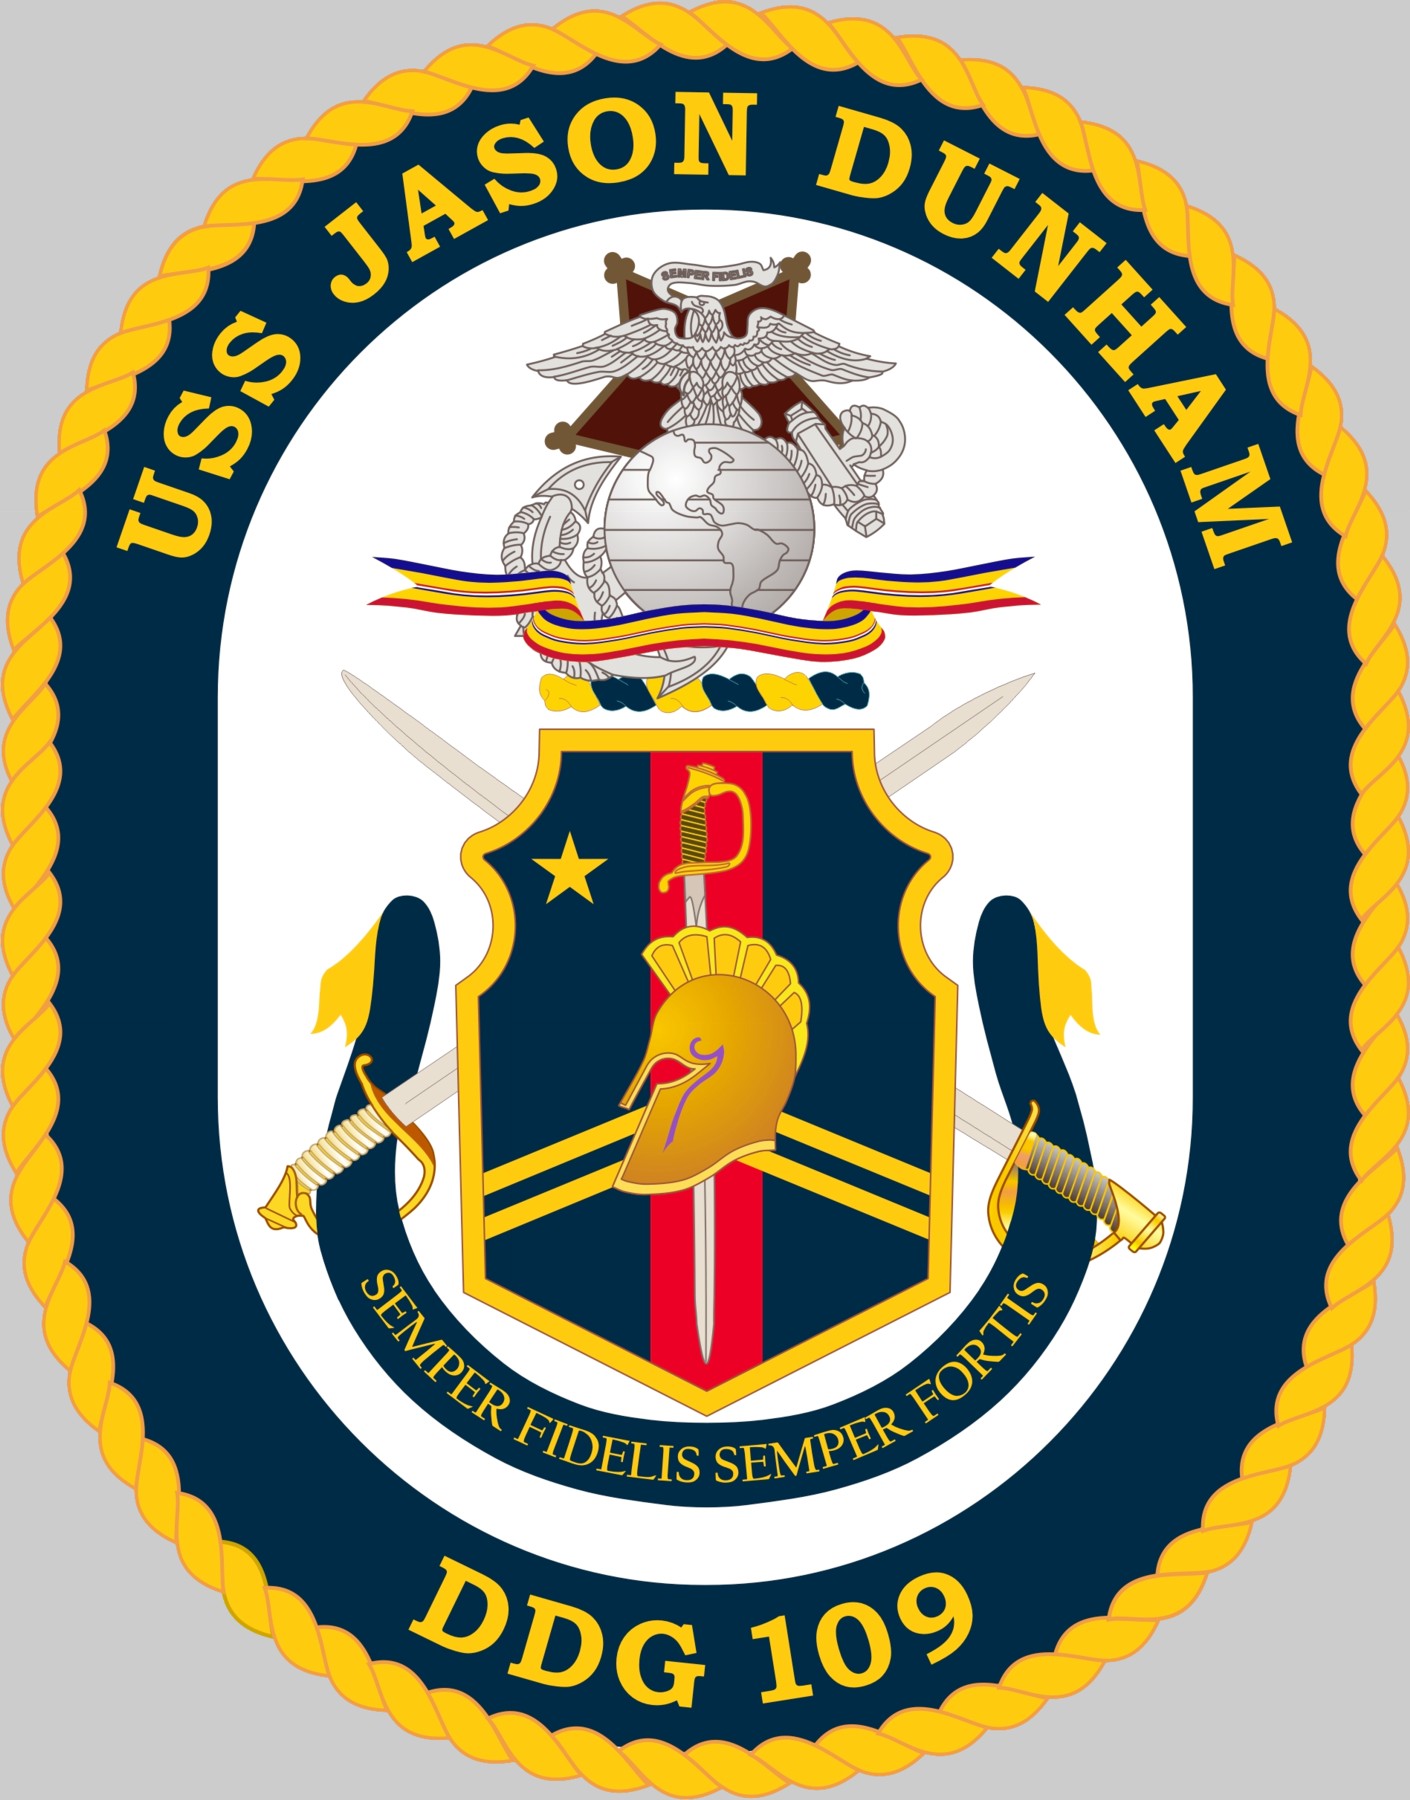 ddg-109 uss jason dunham crest insignia patch badge arleigh burke class guided missile destroyer aegis us navy 02c